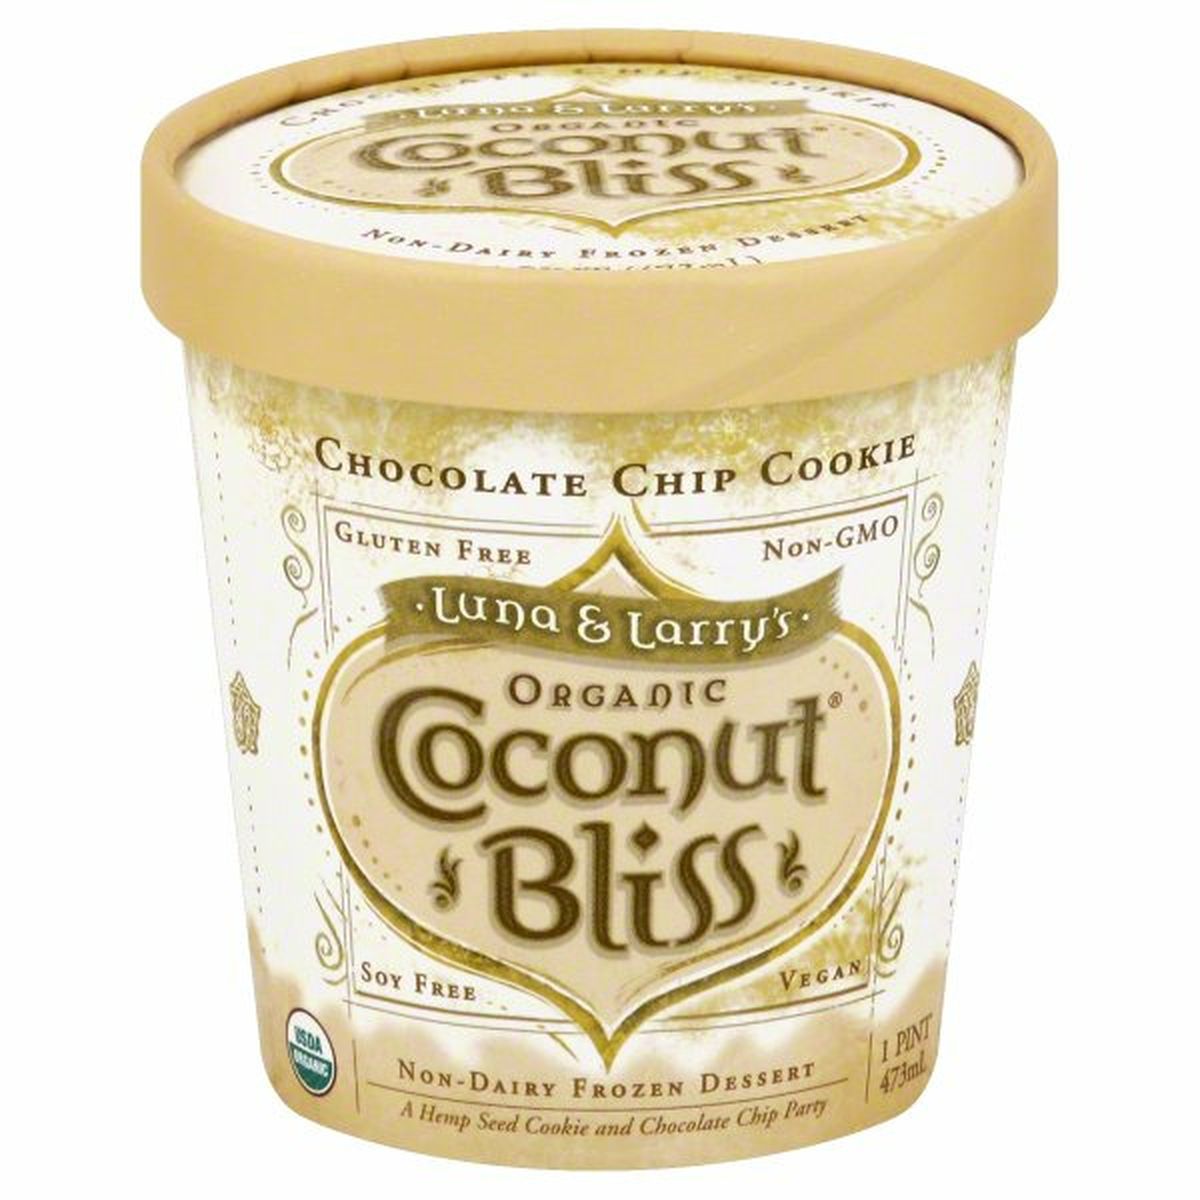 Calories in Coconut Bliss Coconut Bliss Frozen Dessert, Non-Dairy, Organic, Chocolate Chip Cookie